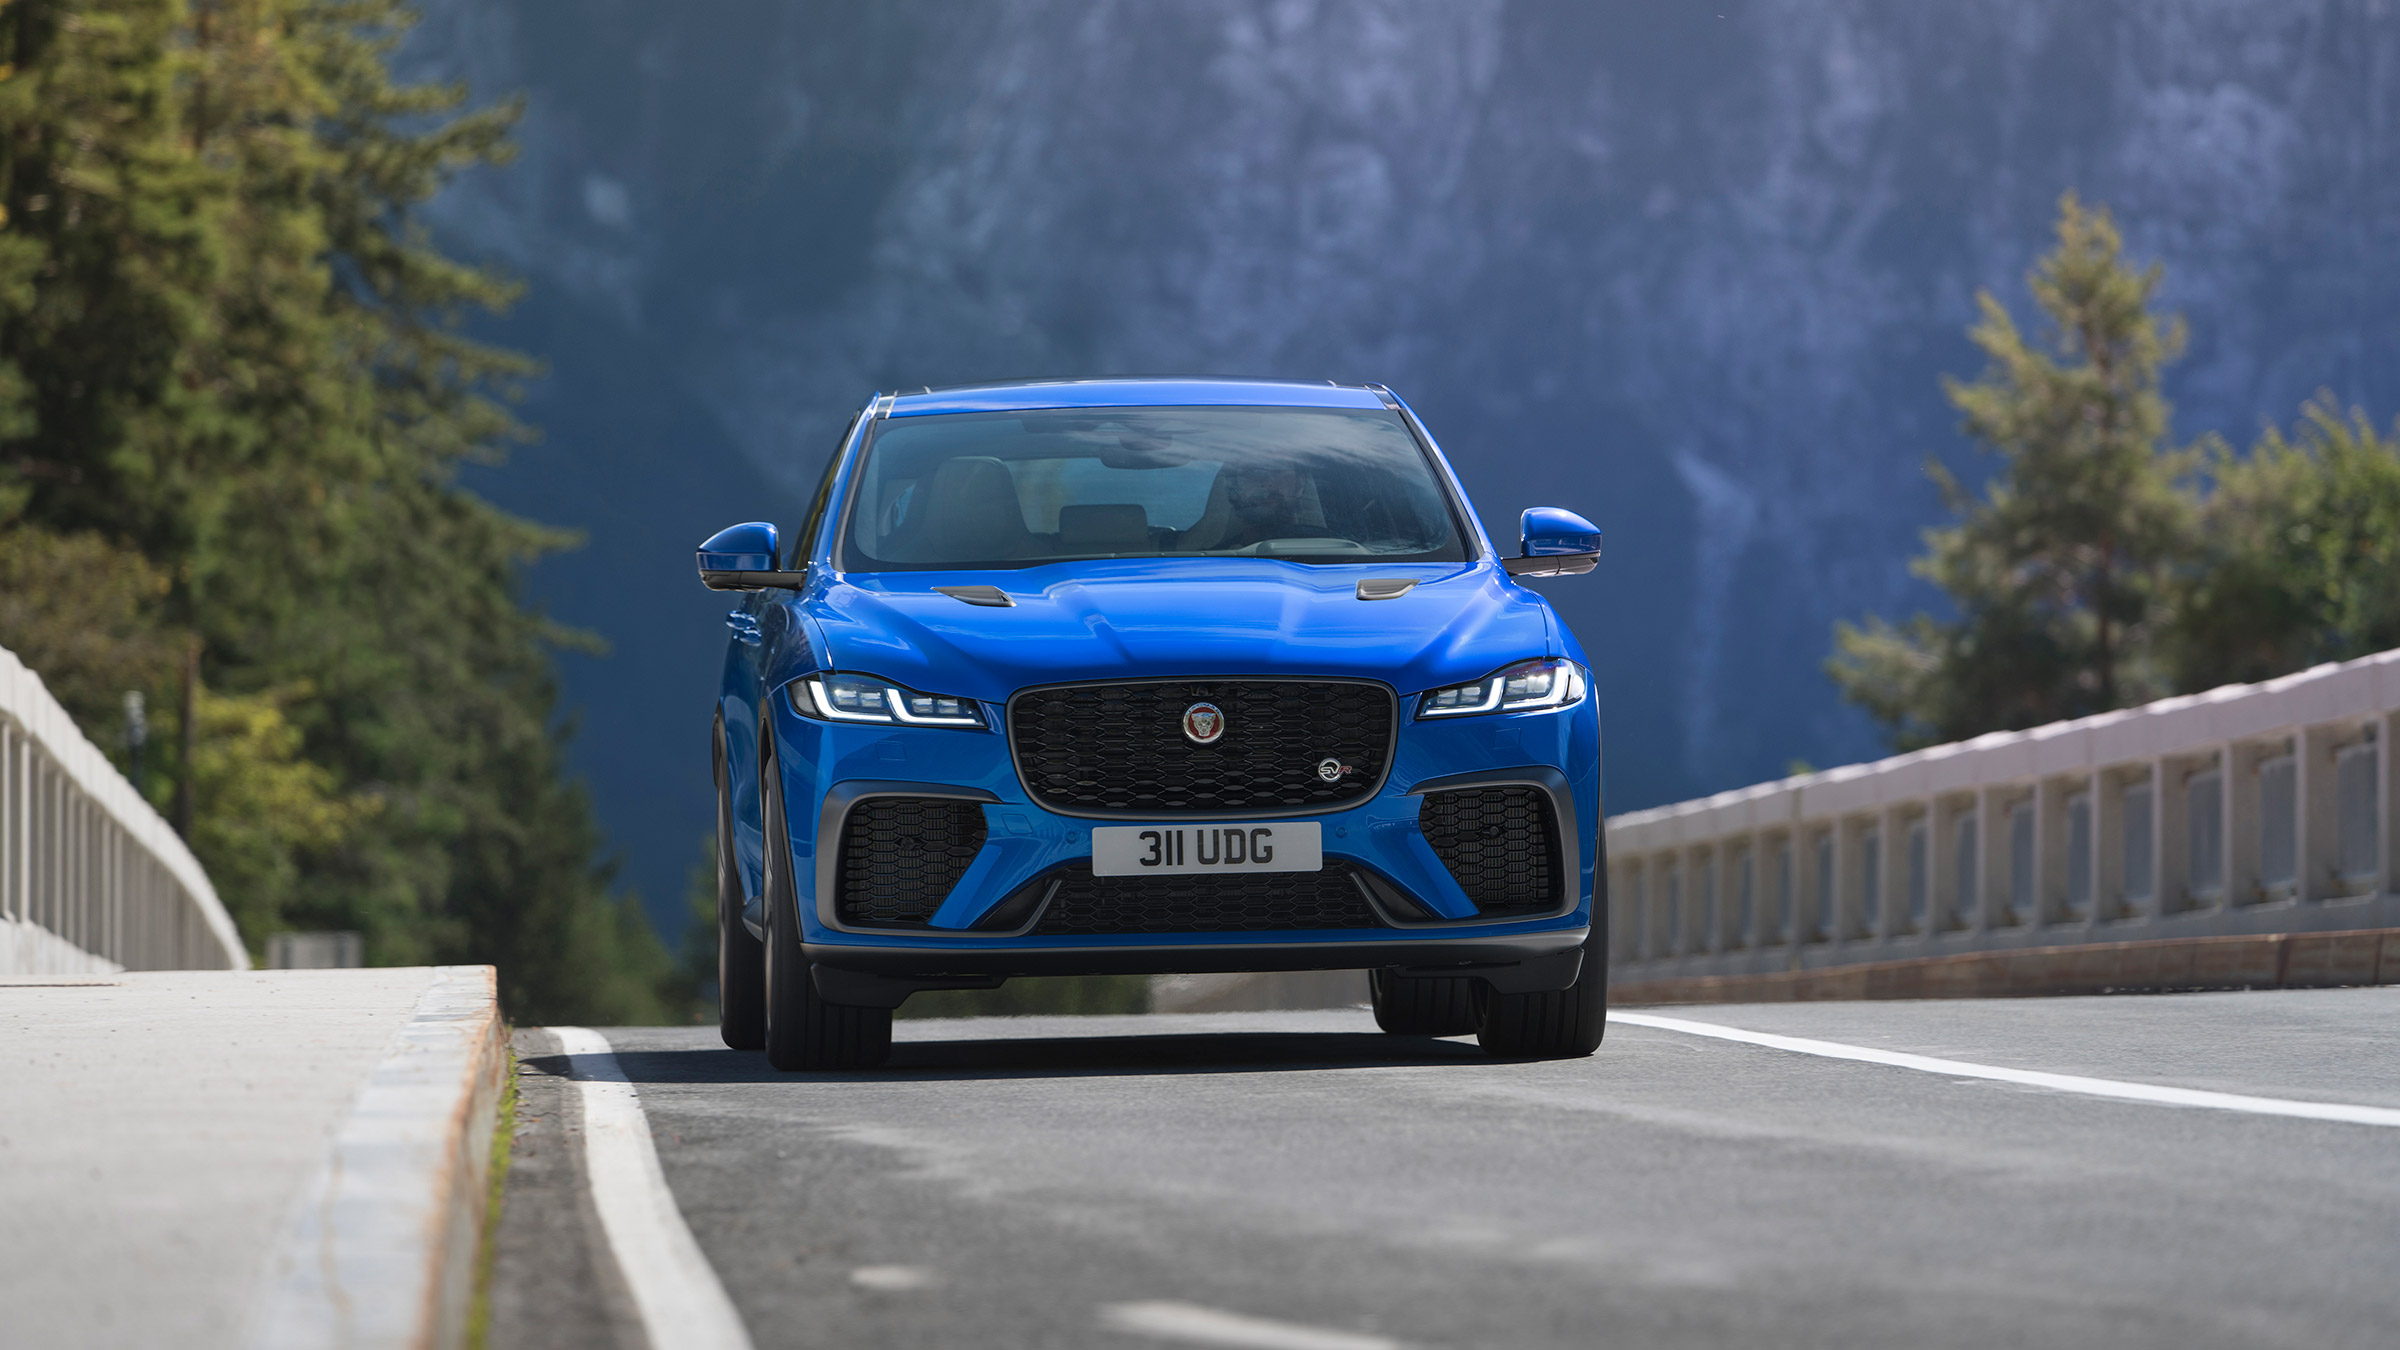 21 Jaguar F Pace Svr Revealed Fresh Face And Tech For 542bhp Suv Evo